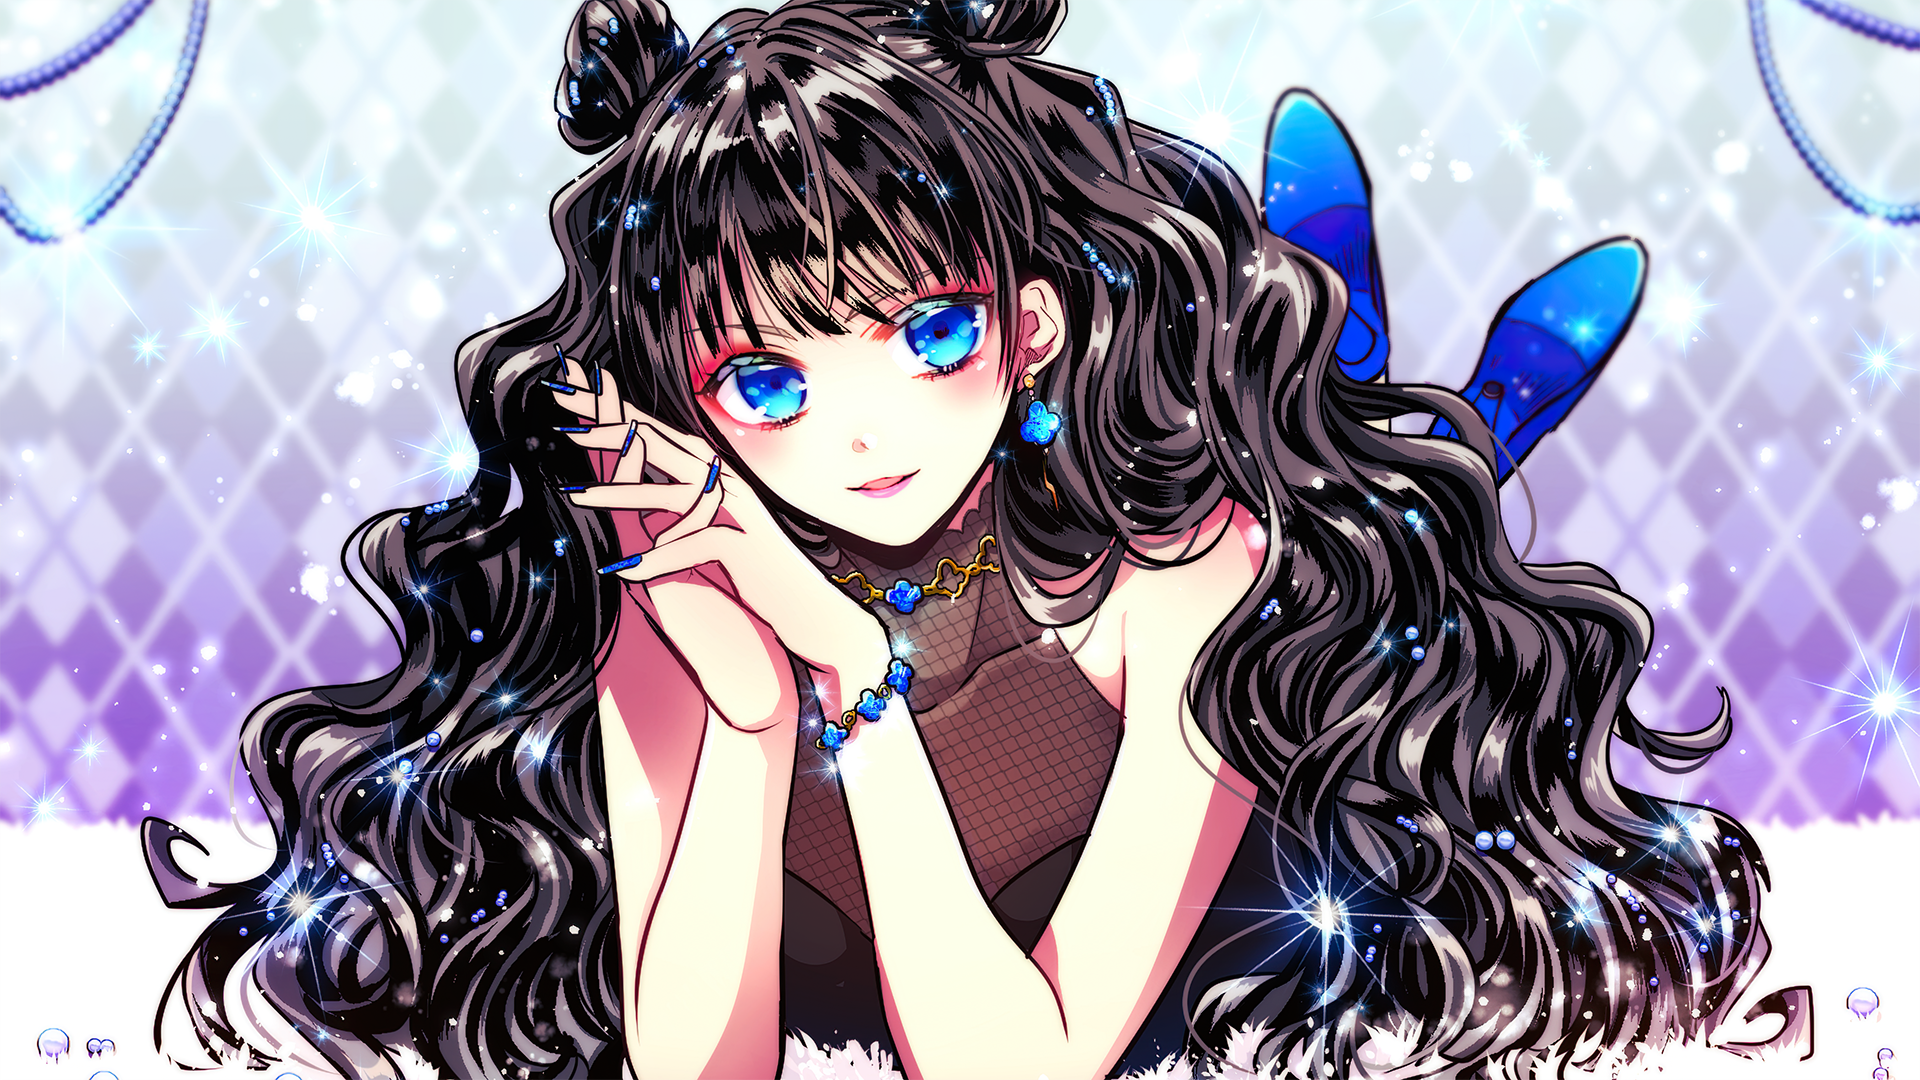 Anime Girl With Curly Hair Wallpapers